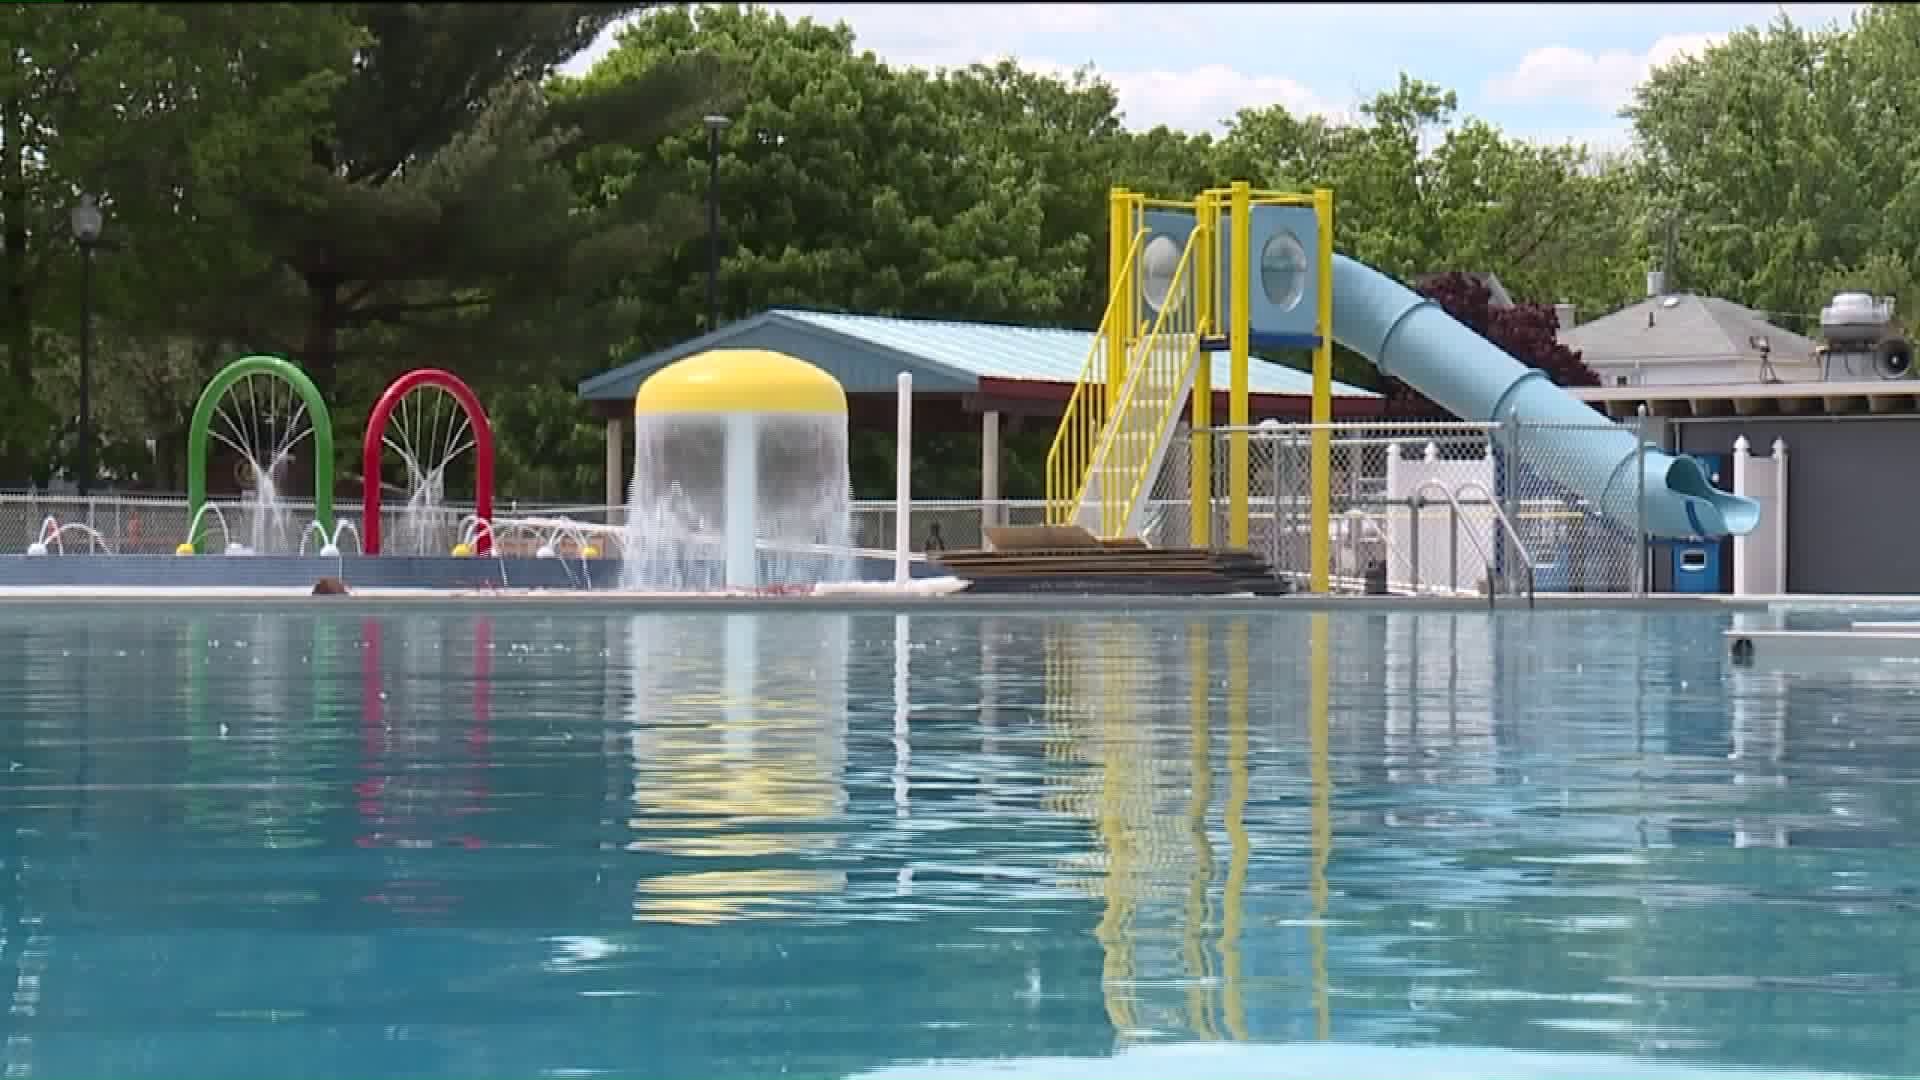 CDC Warns About Possible Sickness at Pools